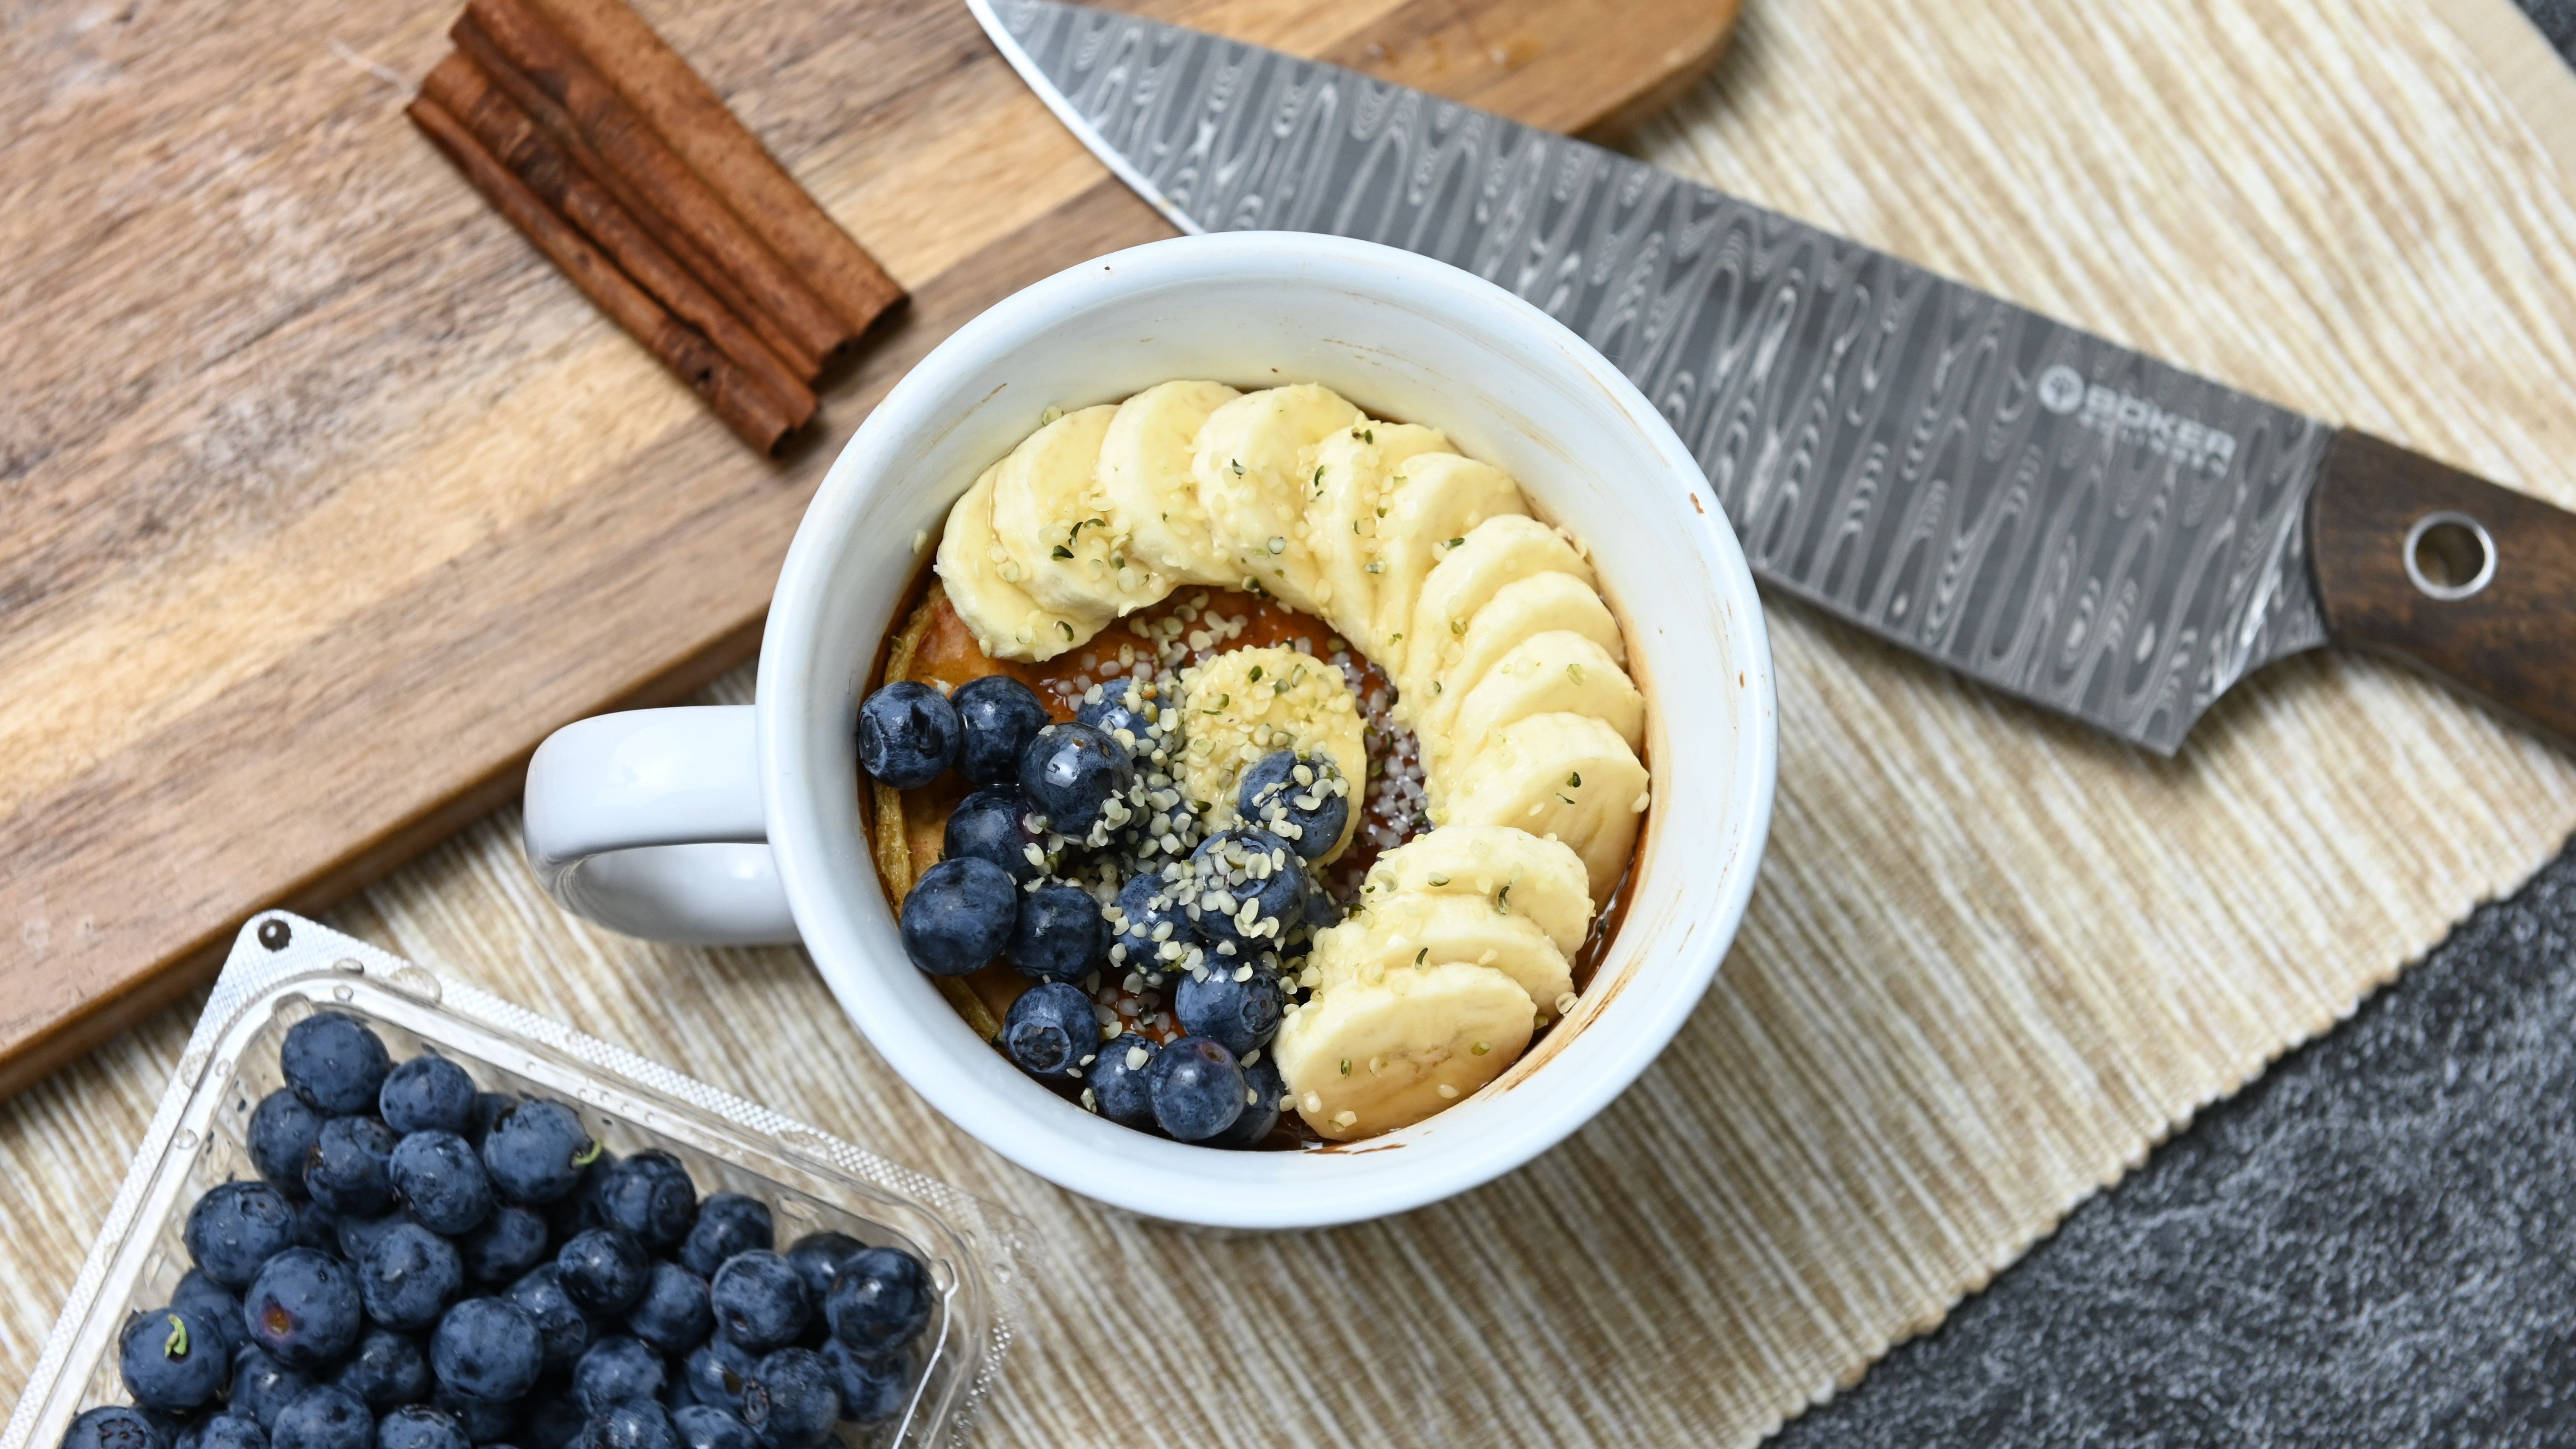 Banana bread topped with fresh blueberries and bananas